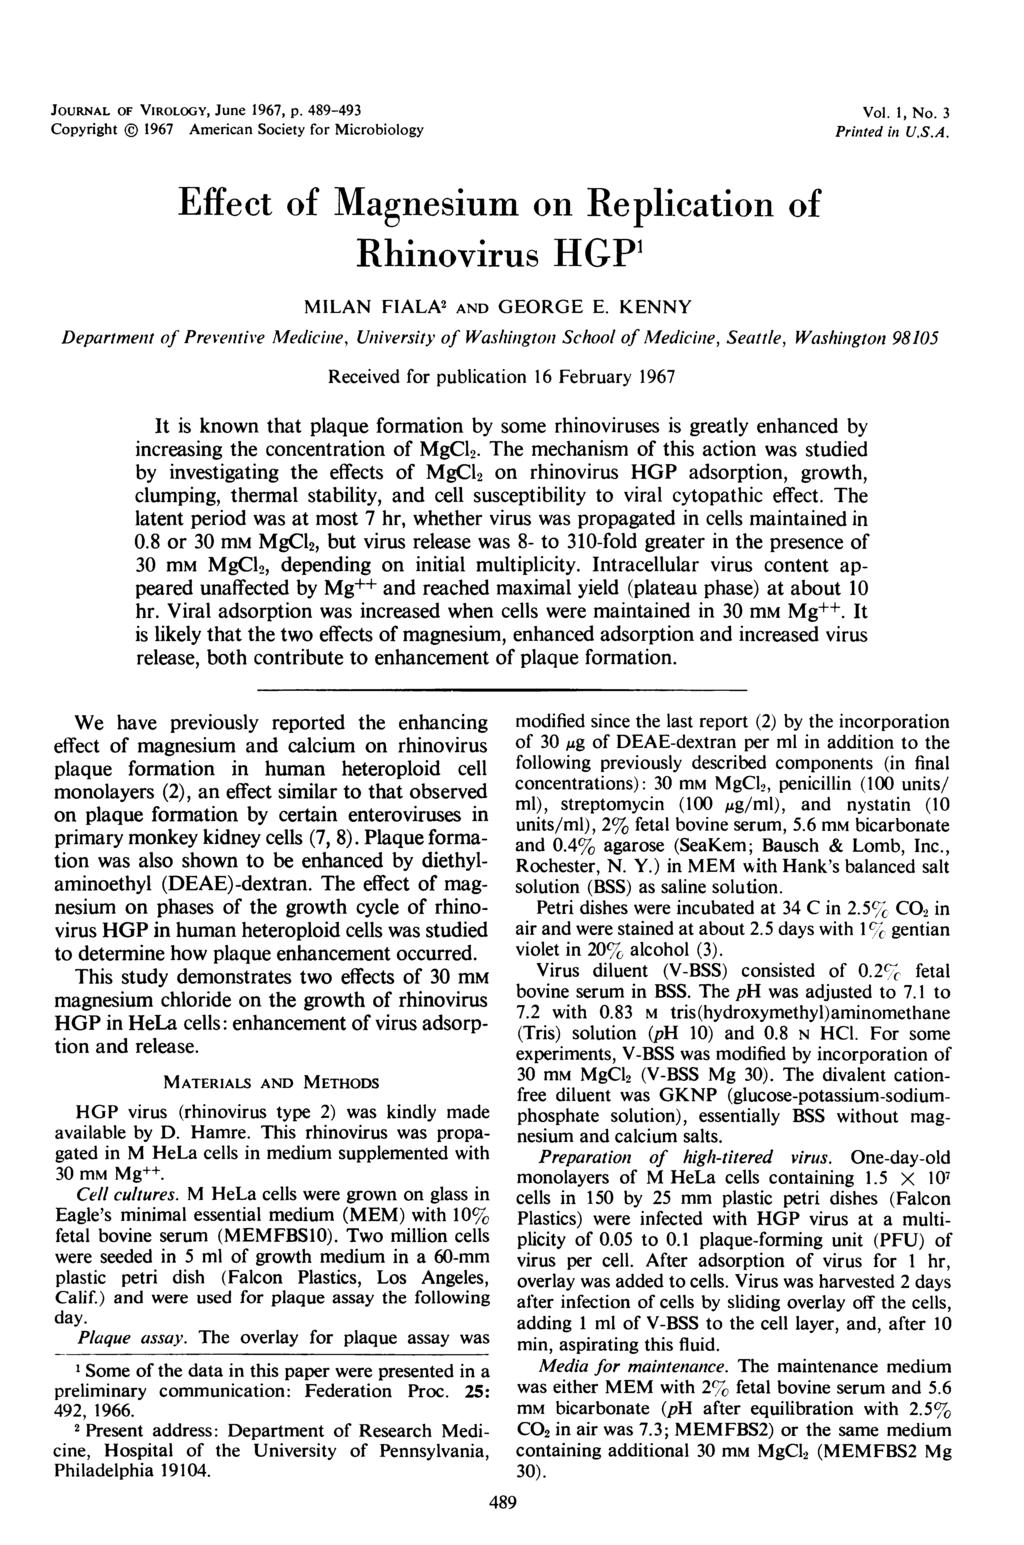 JOURNAL OF VIROLOGY, June 1967, p. 489-493 Copyright 1967 American Society for Microbiology Vol. 1, No. 3 Printed in U.S.A. Effect of Magnesium on Replication of Rhinovirus HGP' MILAN FIALA' AND GEORGE E.